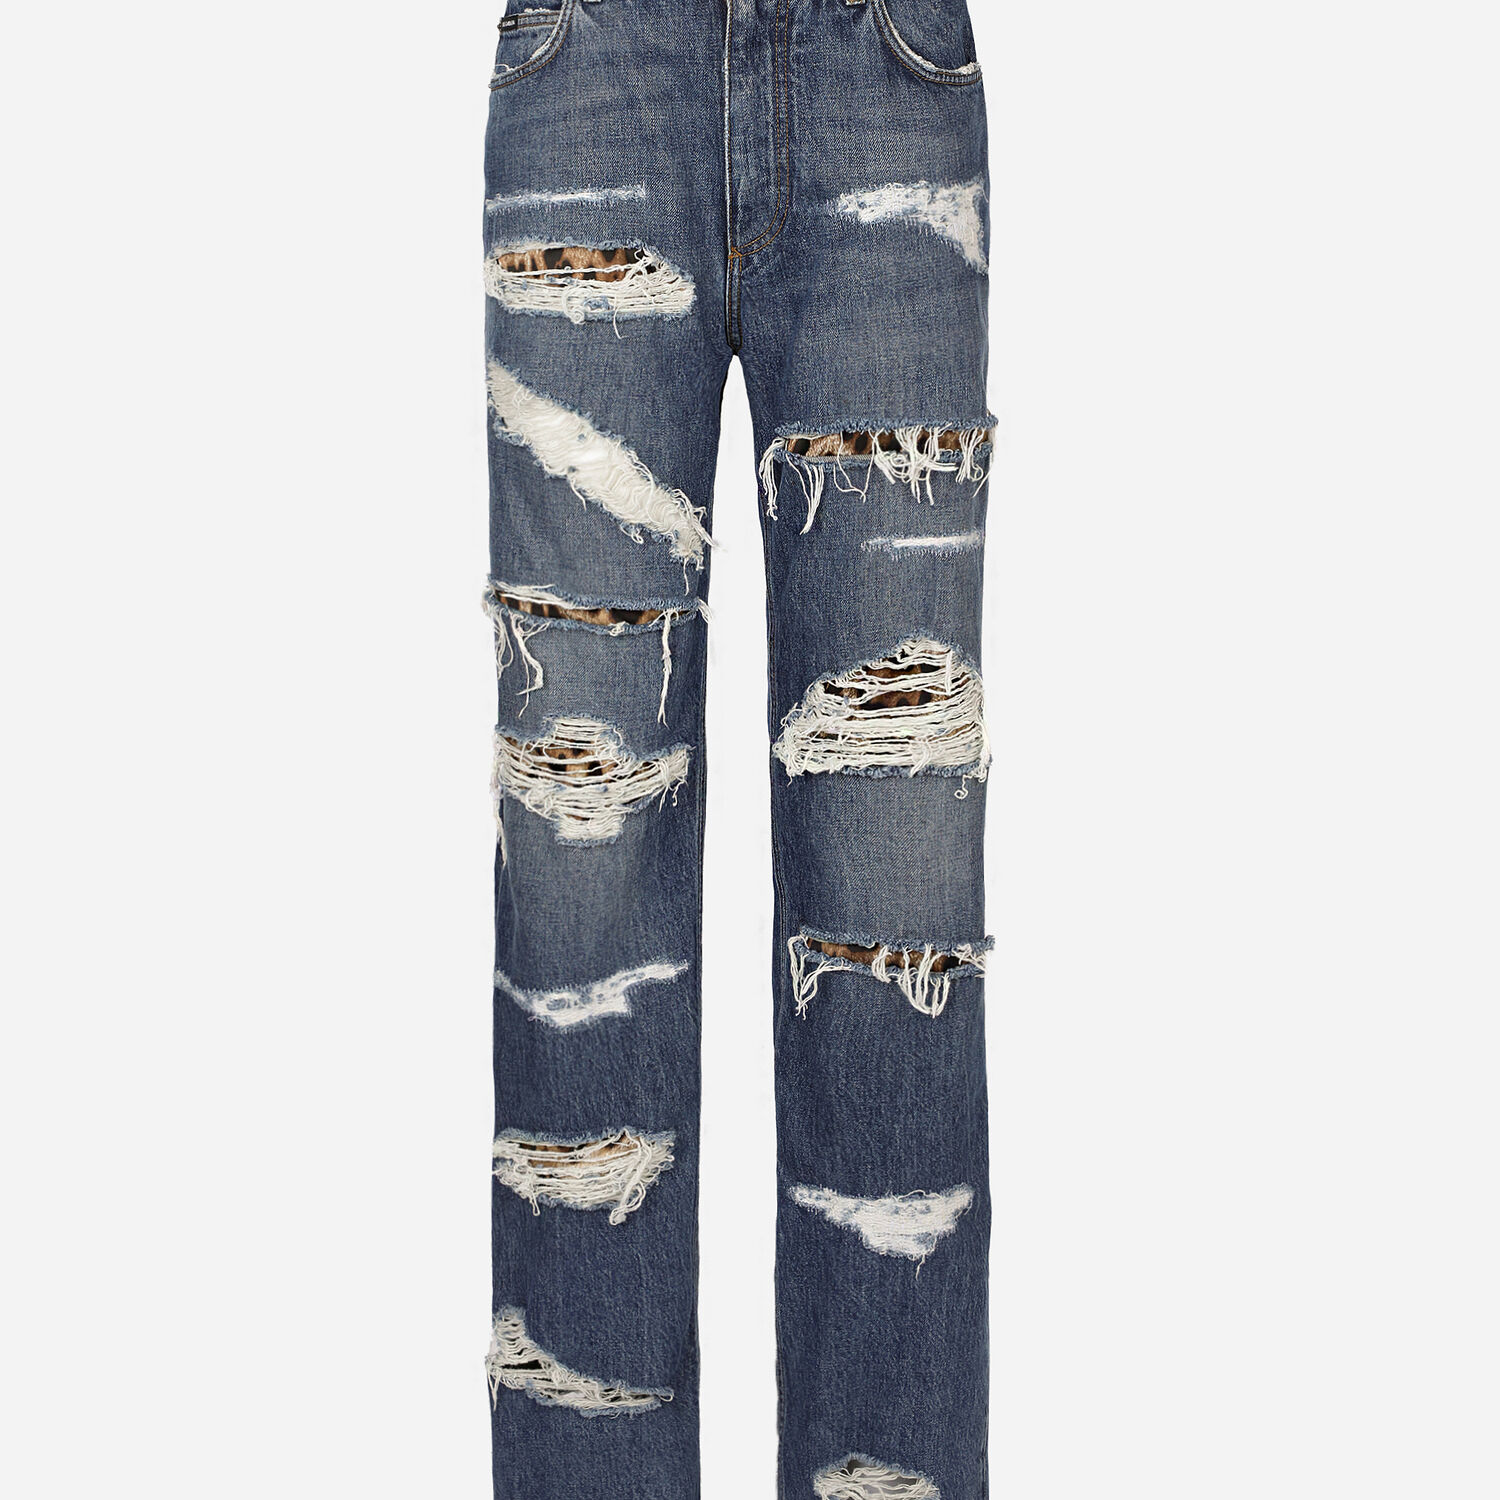 Loose jeans with DG leopard print in Multicolor for